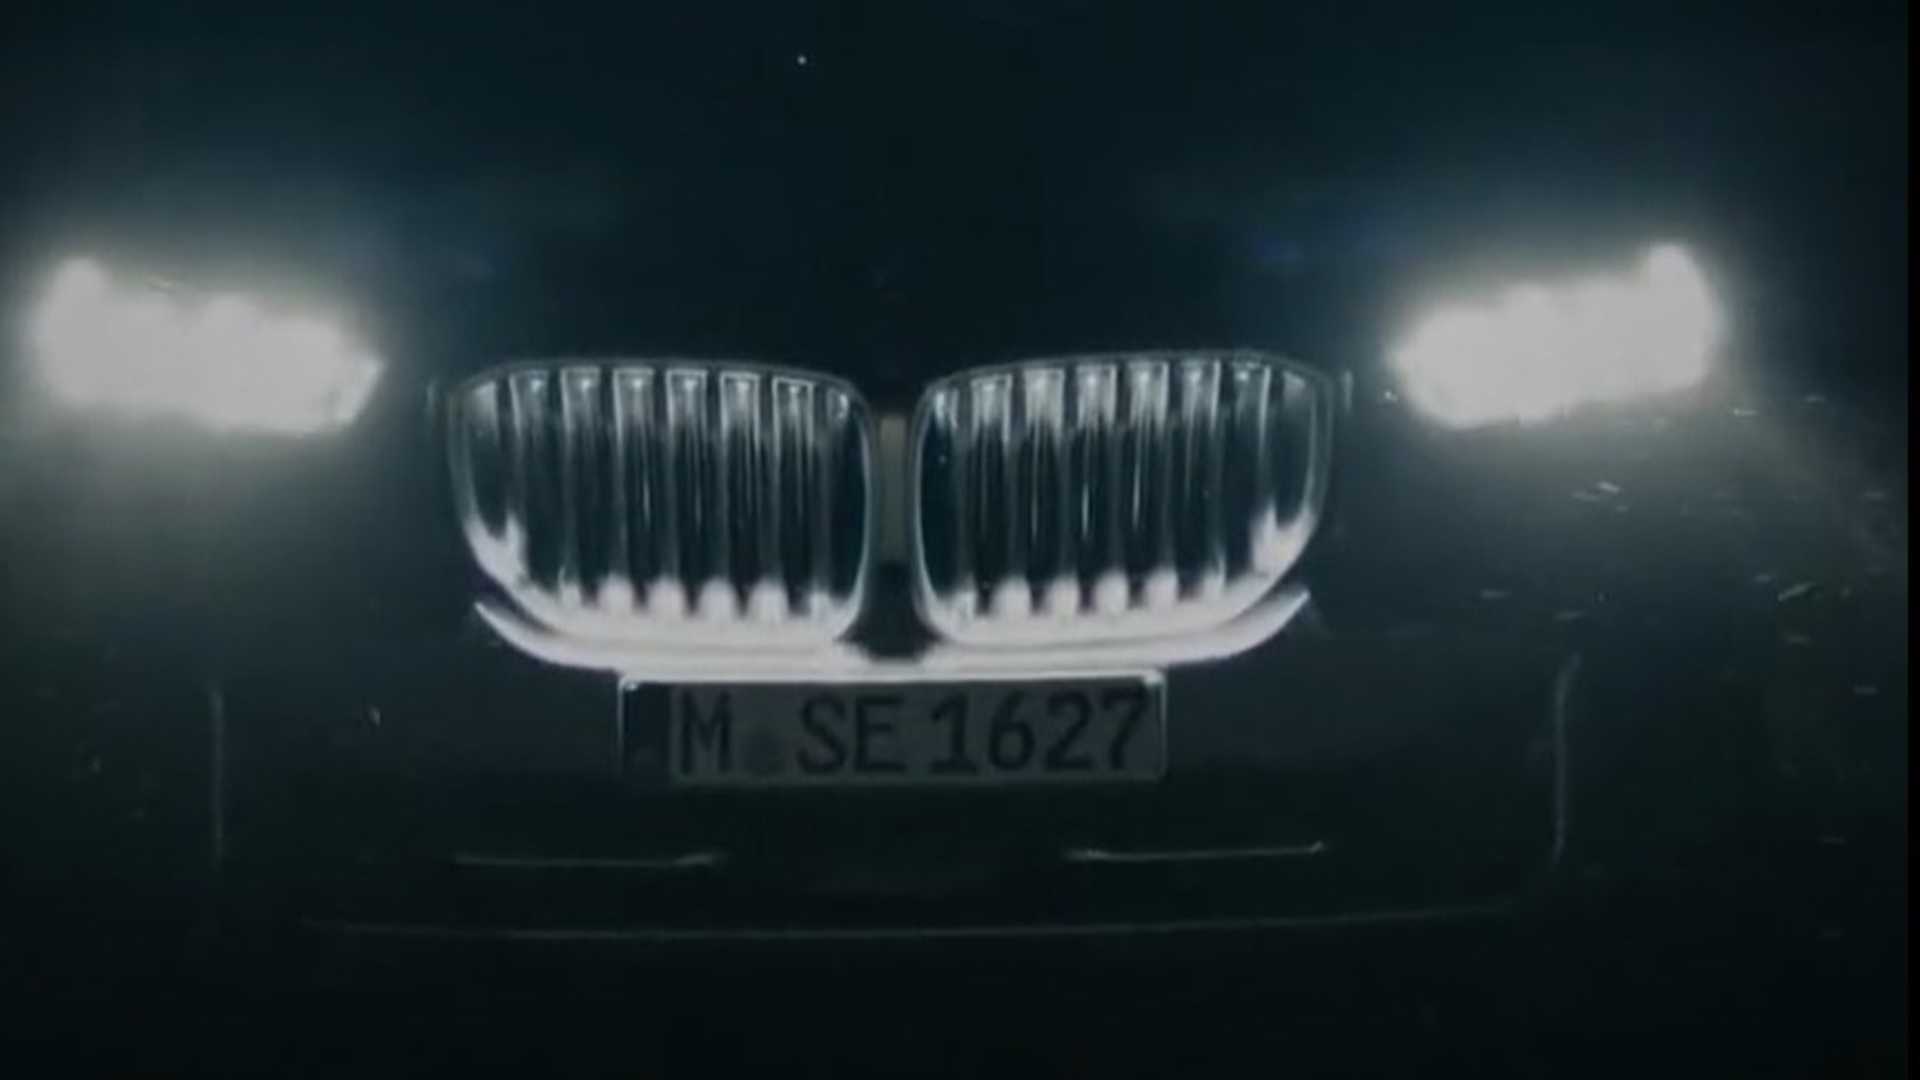 Bmw X5 Teased With Illuminated Grille